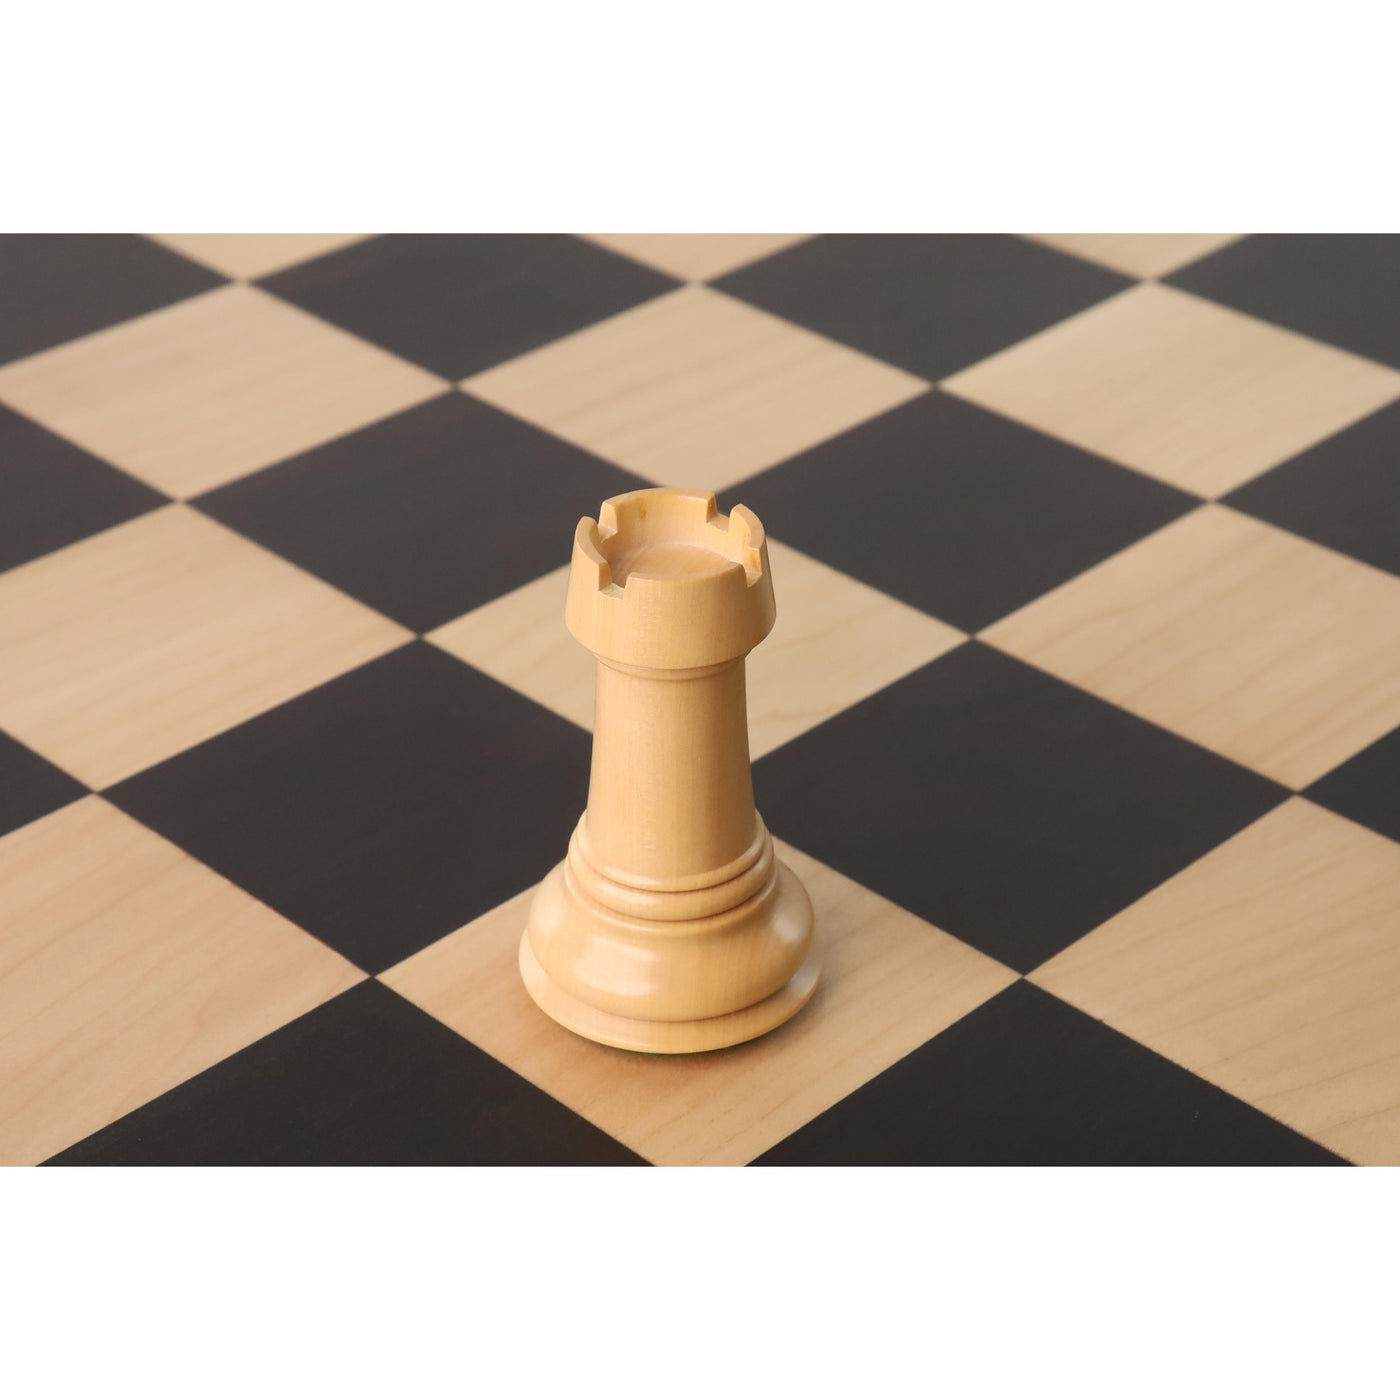 4.5" Tilted Knight Luxury Staunton Chess Set - Chess Pieces Only - Ebony Wood & Boxwood